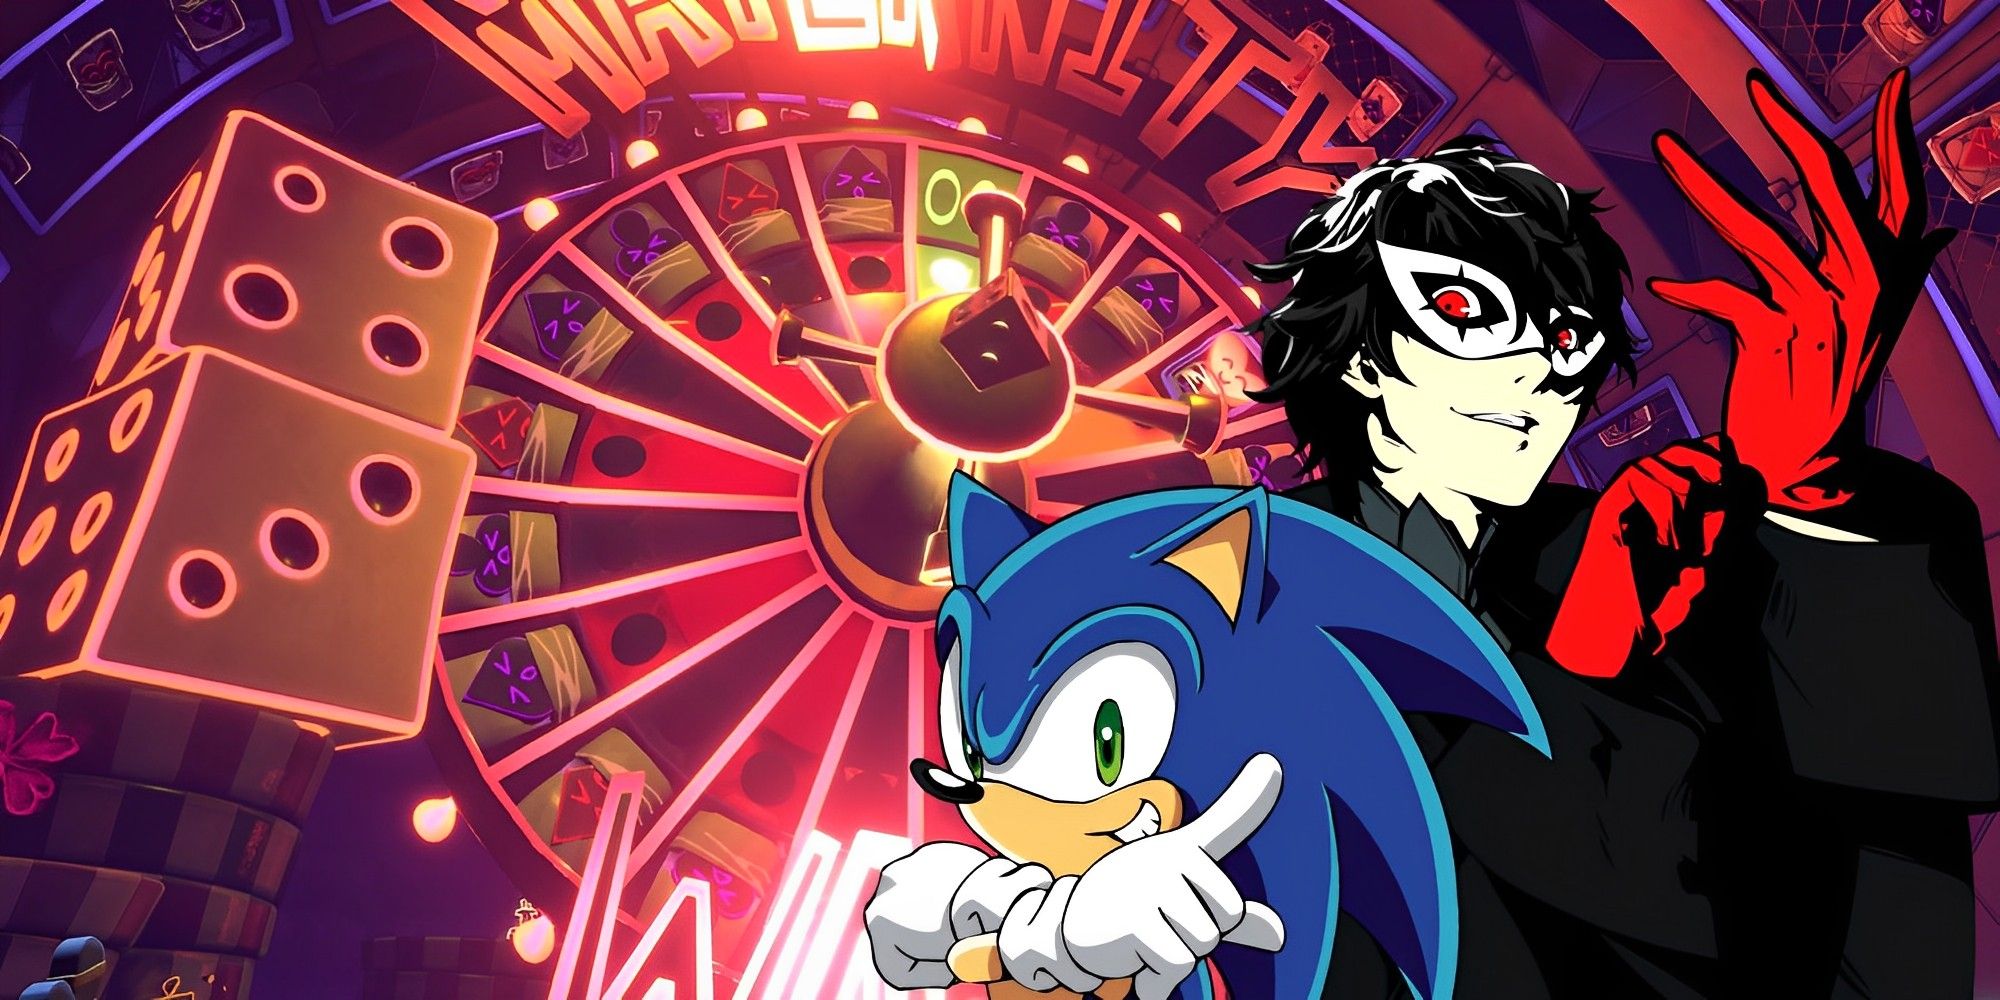 Sonic the Hedgehog and Joker from Persona 5 in front of a roulette wheel from Psychonauts 2